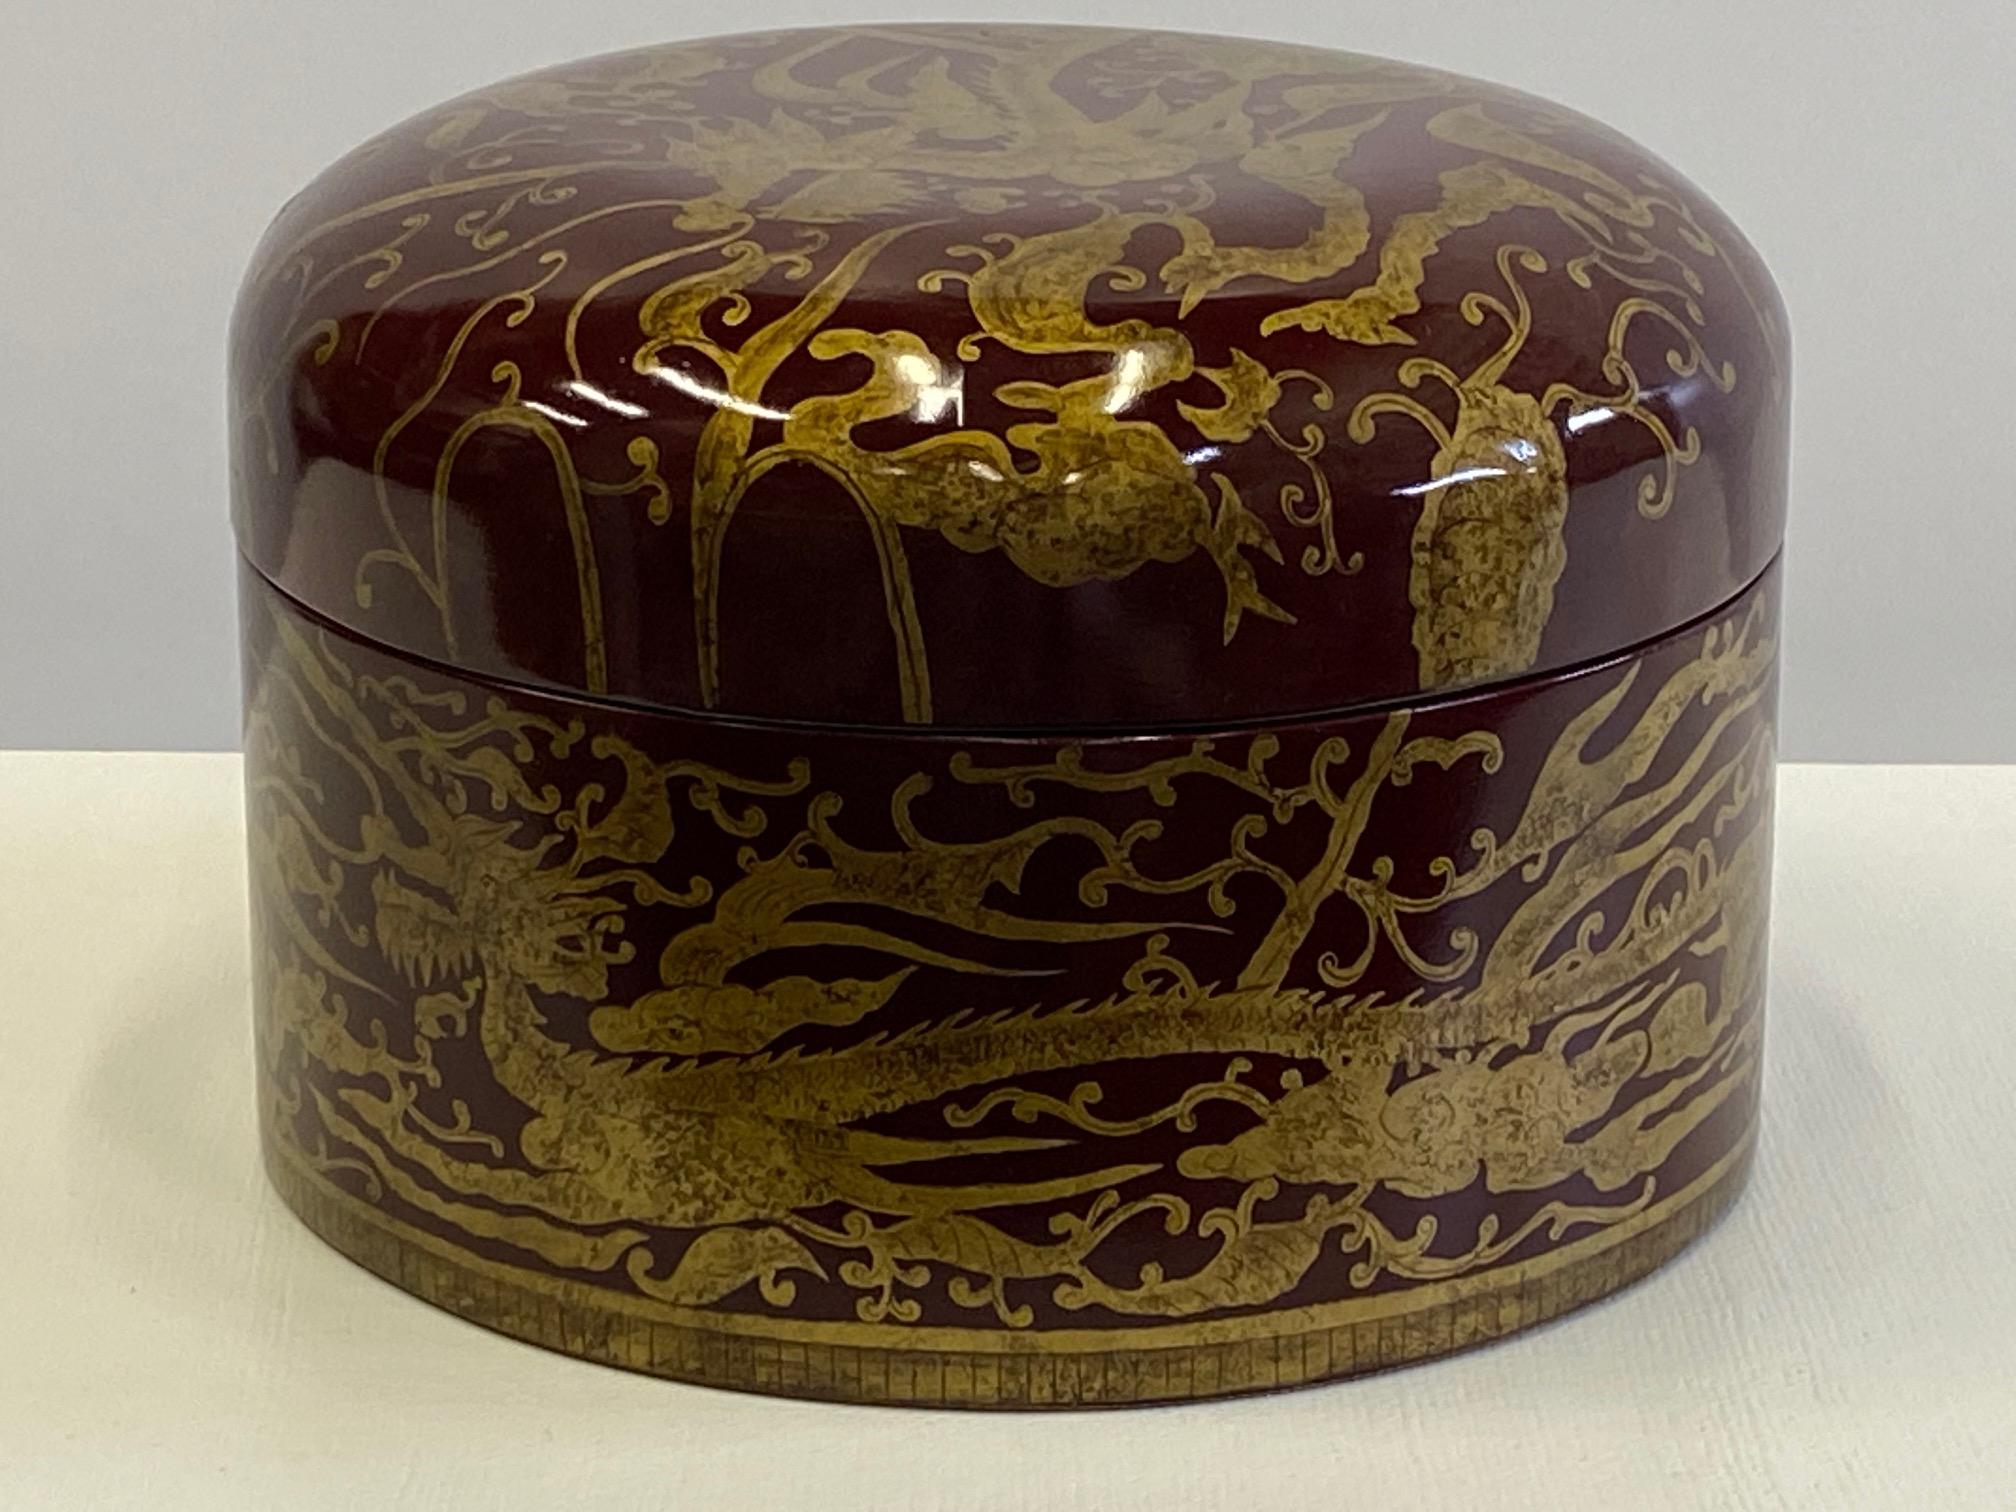 Gorgeous round jewel of a red laquered lidded box having gold Asian inspired decoration with dragons and birds.